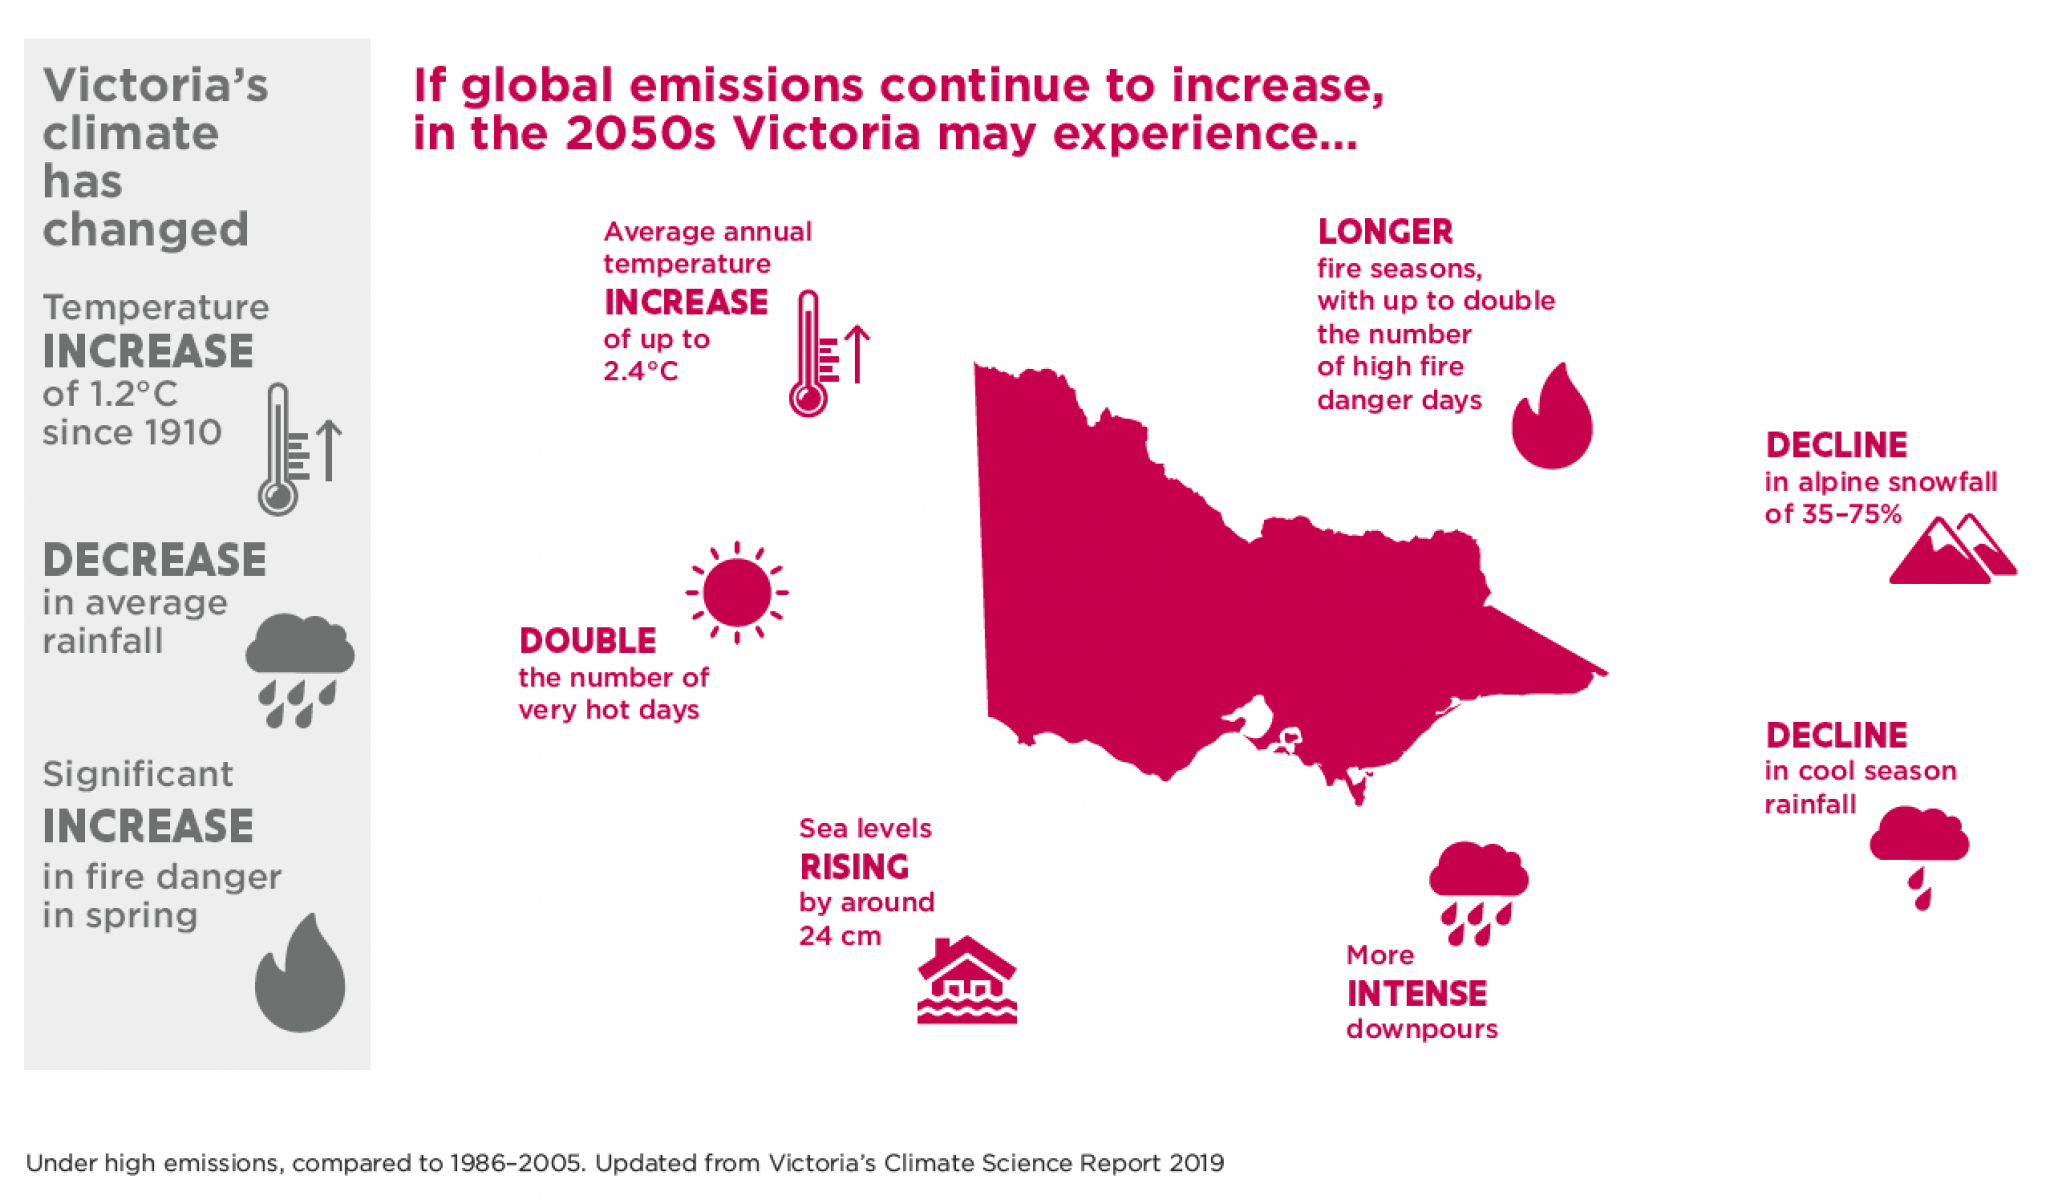 If global emissions continue to increase, in the 2050s Victoria may experience... Average annual temperature increase of up to 2.4 degrees Celsius. Longer fire seasons, with up to double the number of high fire danger days. Decline in alpine snowfall of 25-75%. Decline in cool season rainfall. More intense downpours. Sea levels rising by around 24 cm. Double the number of very hot days. Victoria's climate has changed. Temperature increase of 1.2 degrees Celsius since 1910. Decrease in average rainfall. Significant increase in fire danger in spring. 